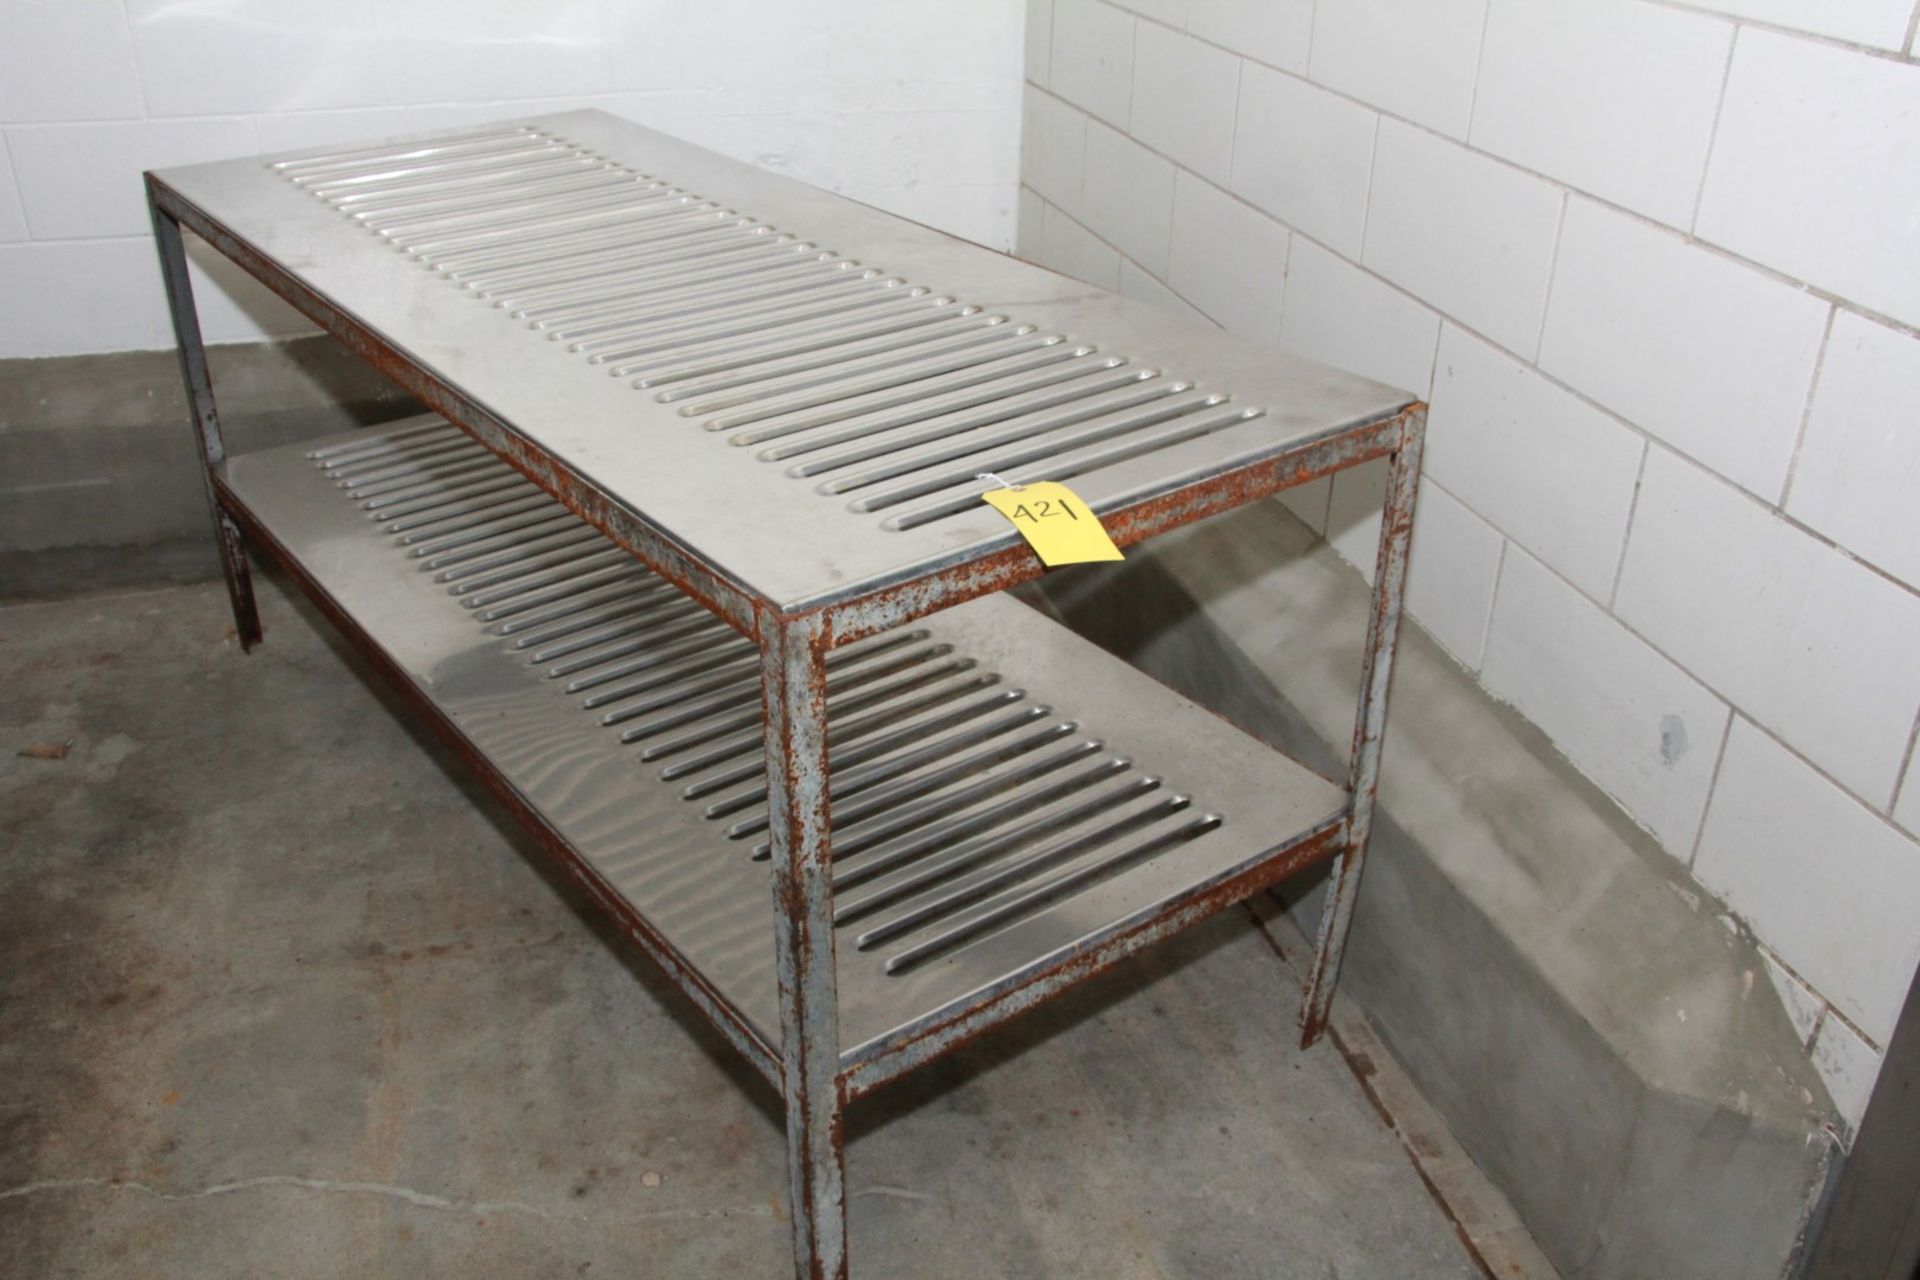 STAINLESS STEEL TABLE - SLOTTED. 30"x 72" x 29". - Image 2 of 2